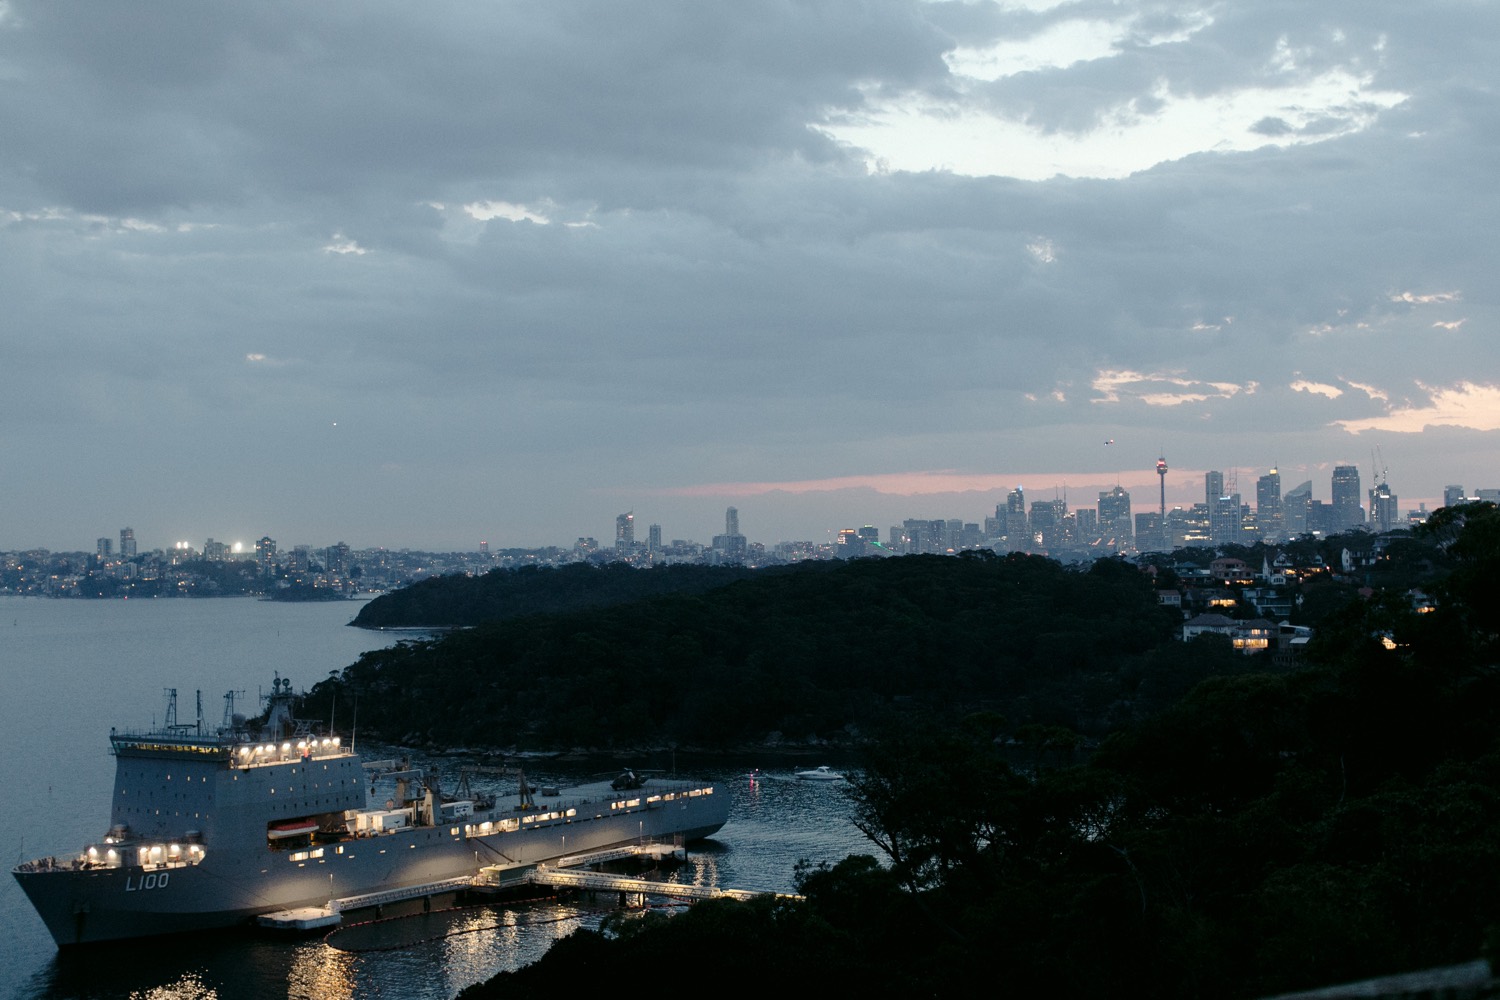 image at dusk looking over sydney harbour from gunners barracks